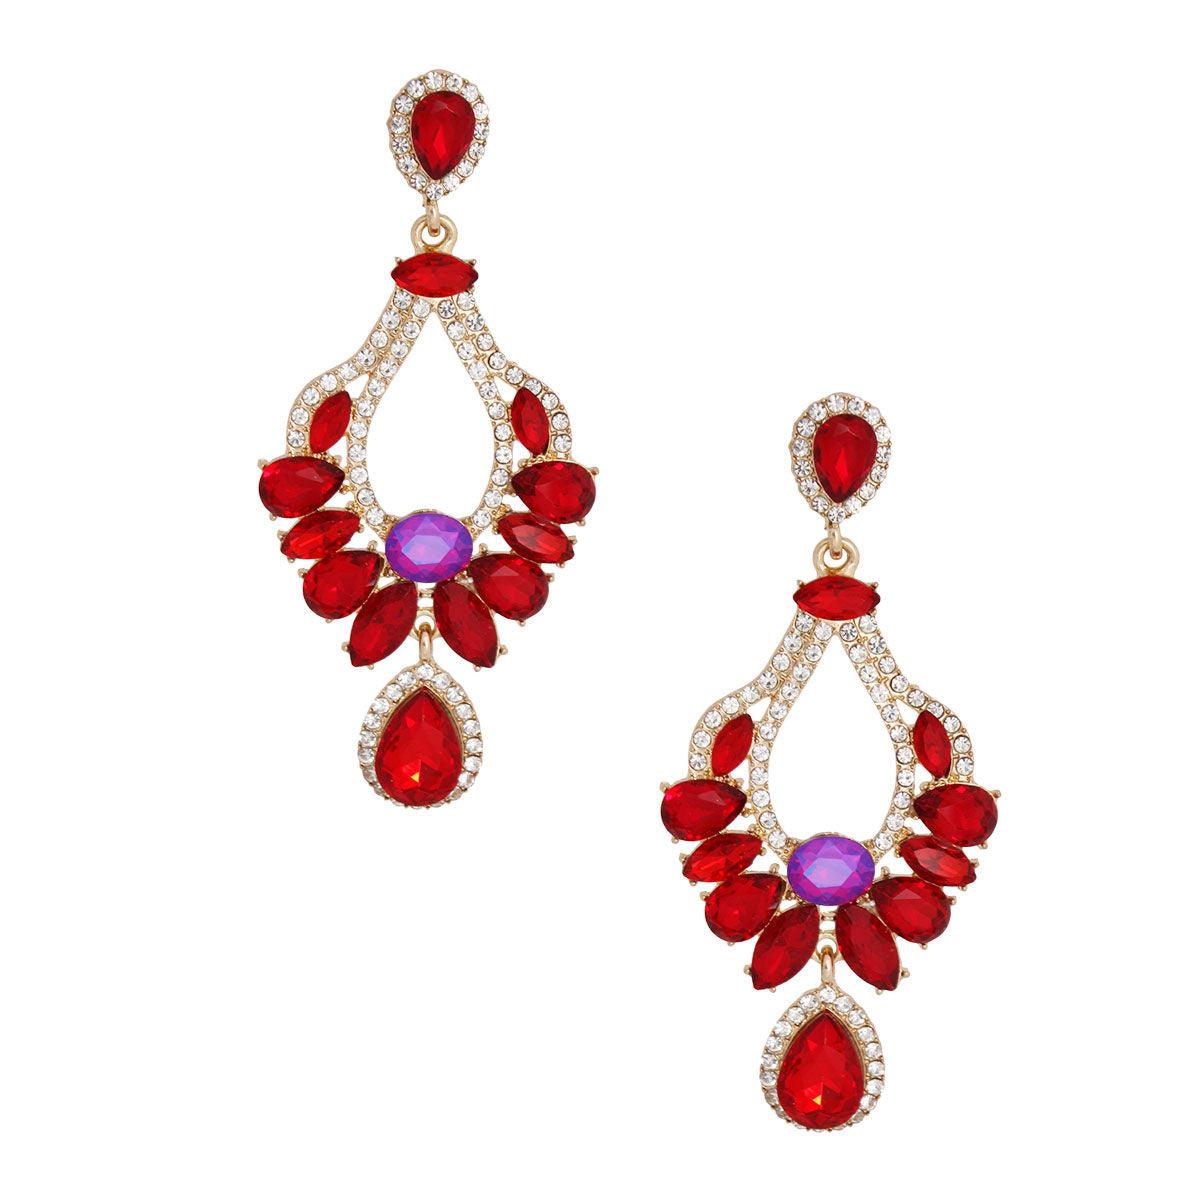 Make a Statement with Red Hot Earrings | Limited Stock Available!